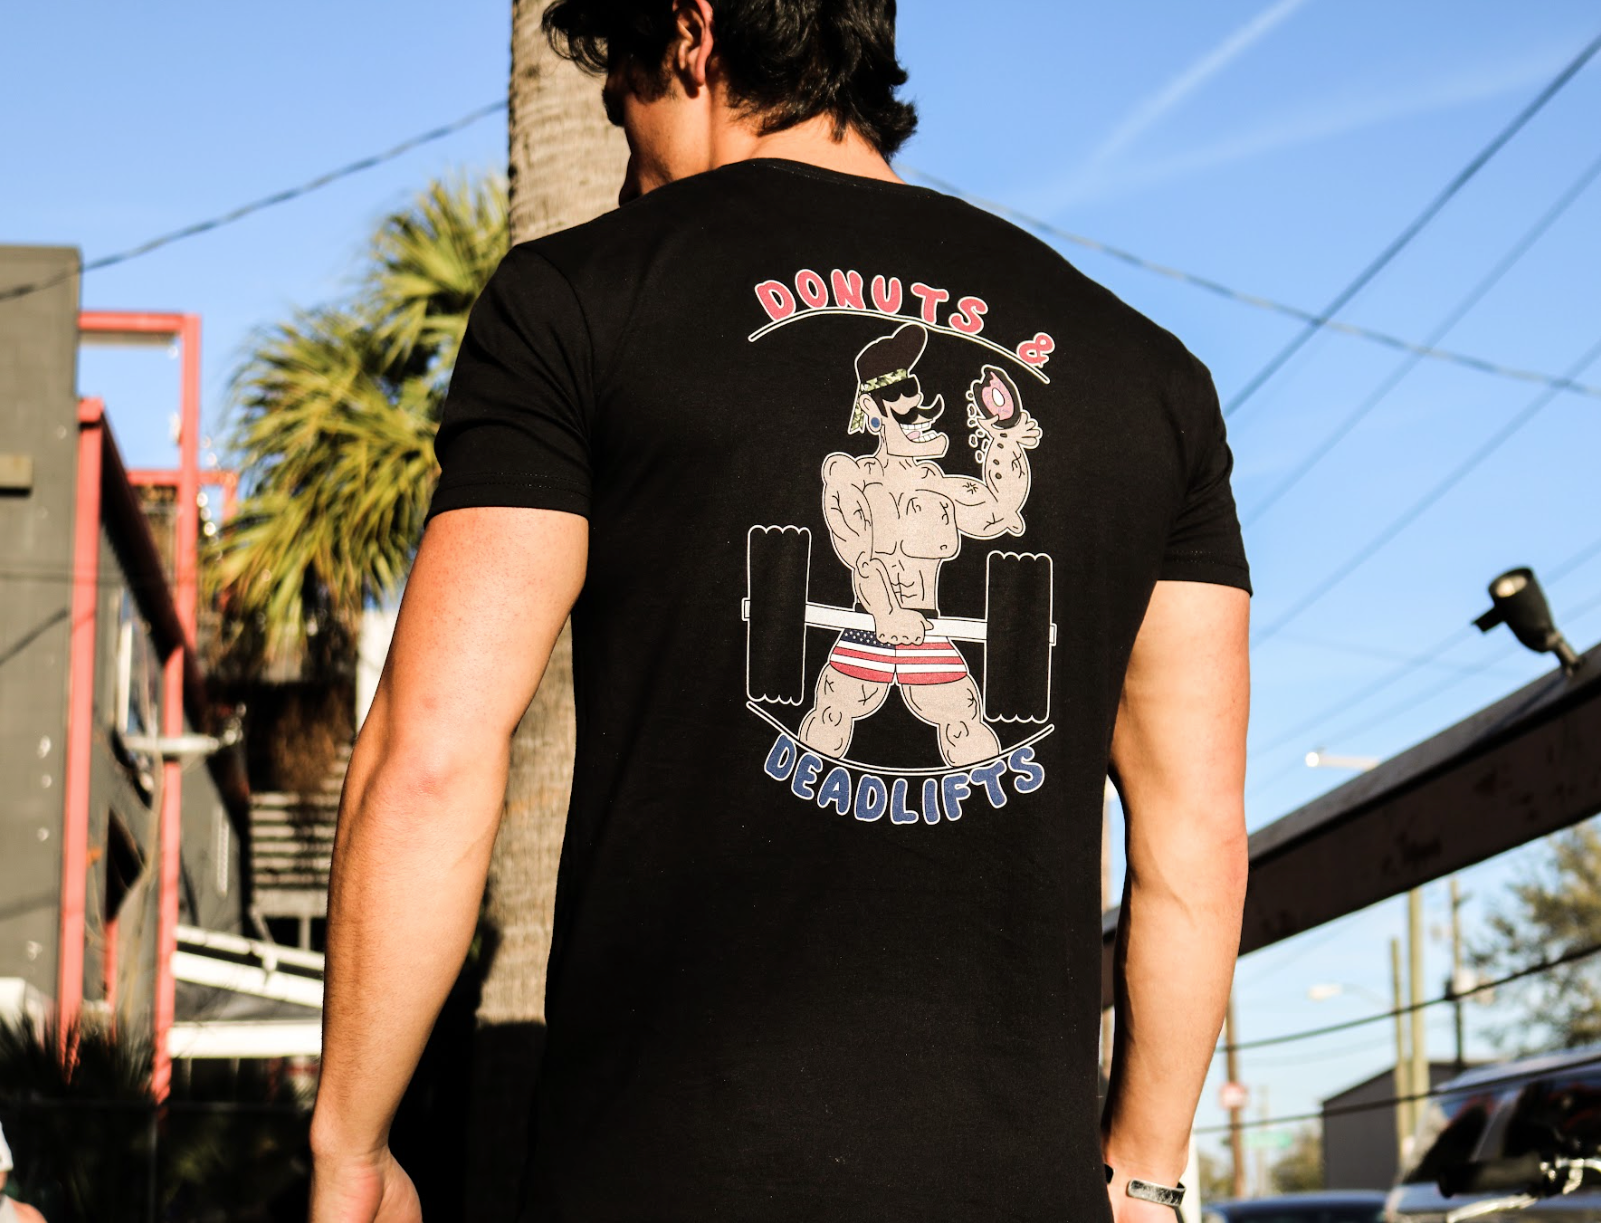 Man wearing black T-Shirt with the "Donuts & Deadlifts" written on the back & a character figure eating a donut while doing a deadlift